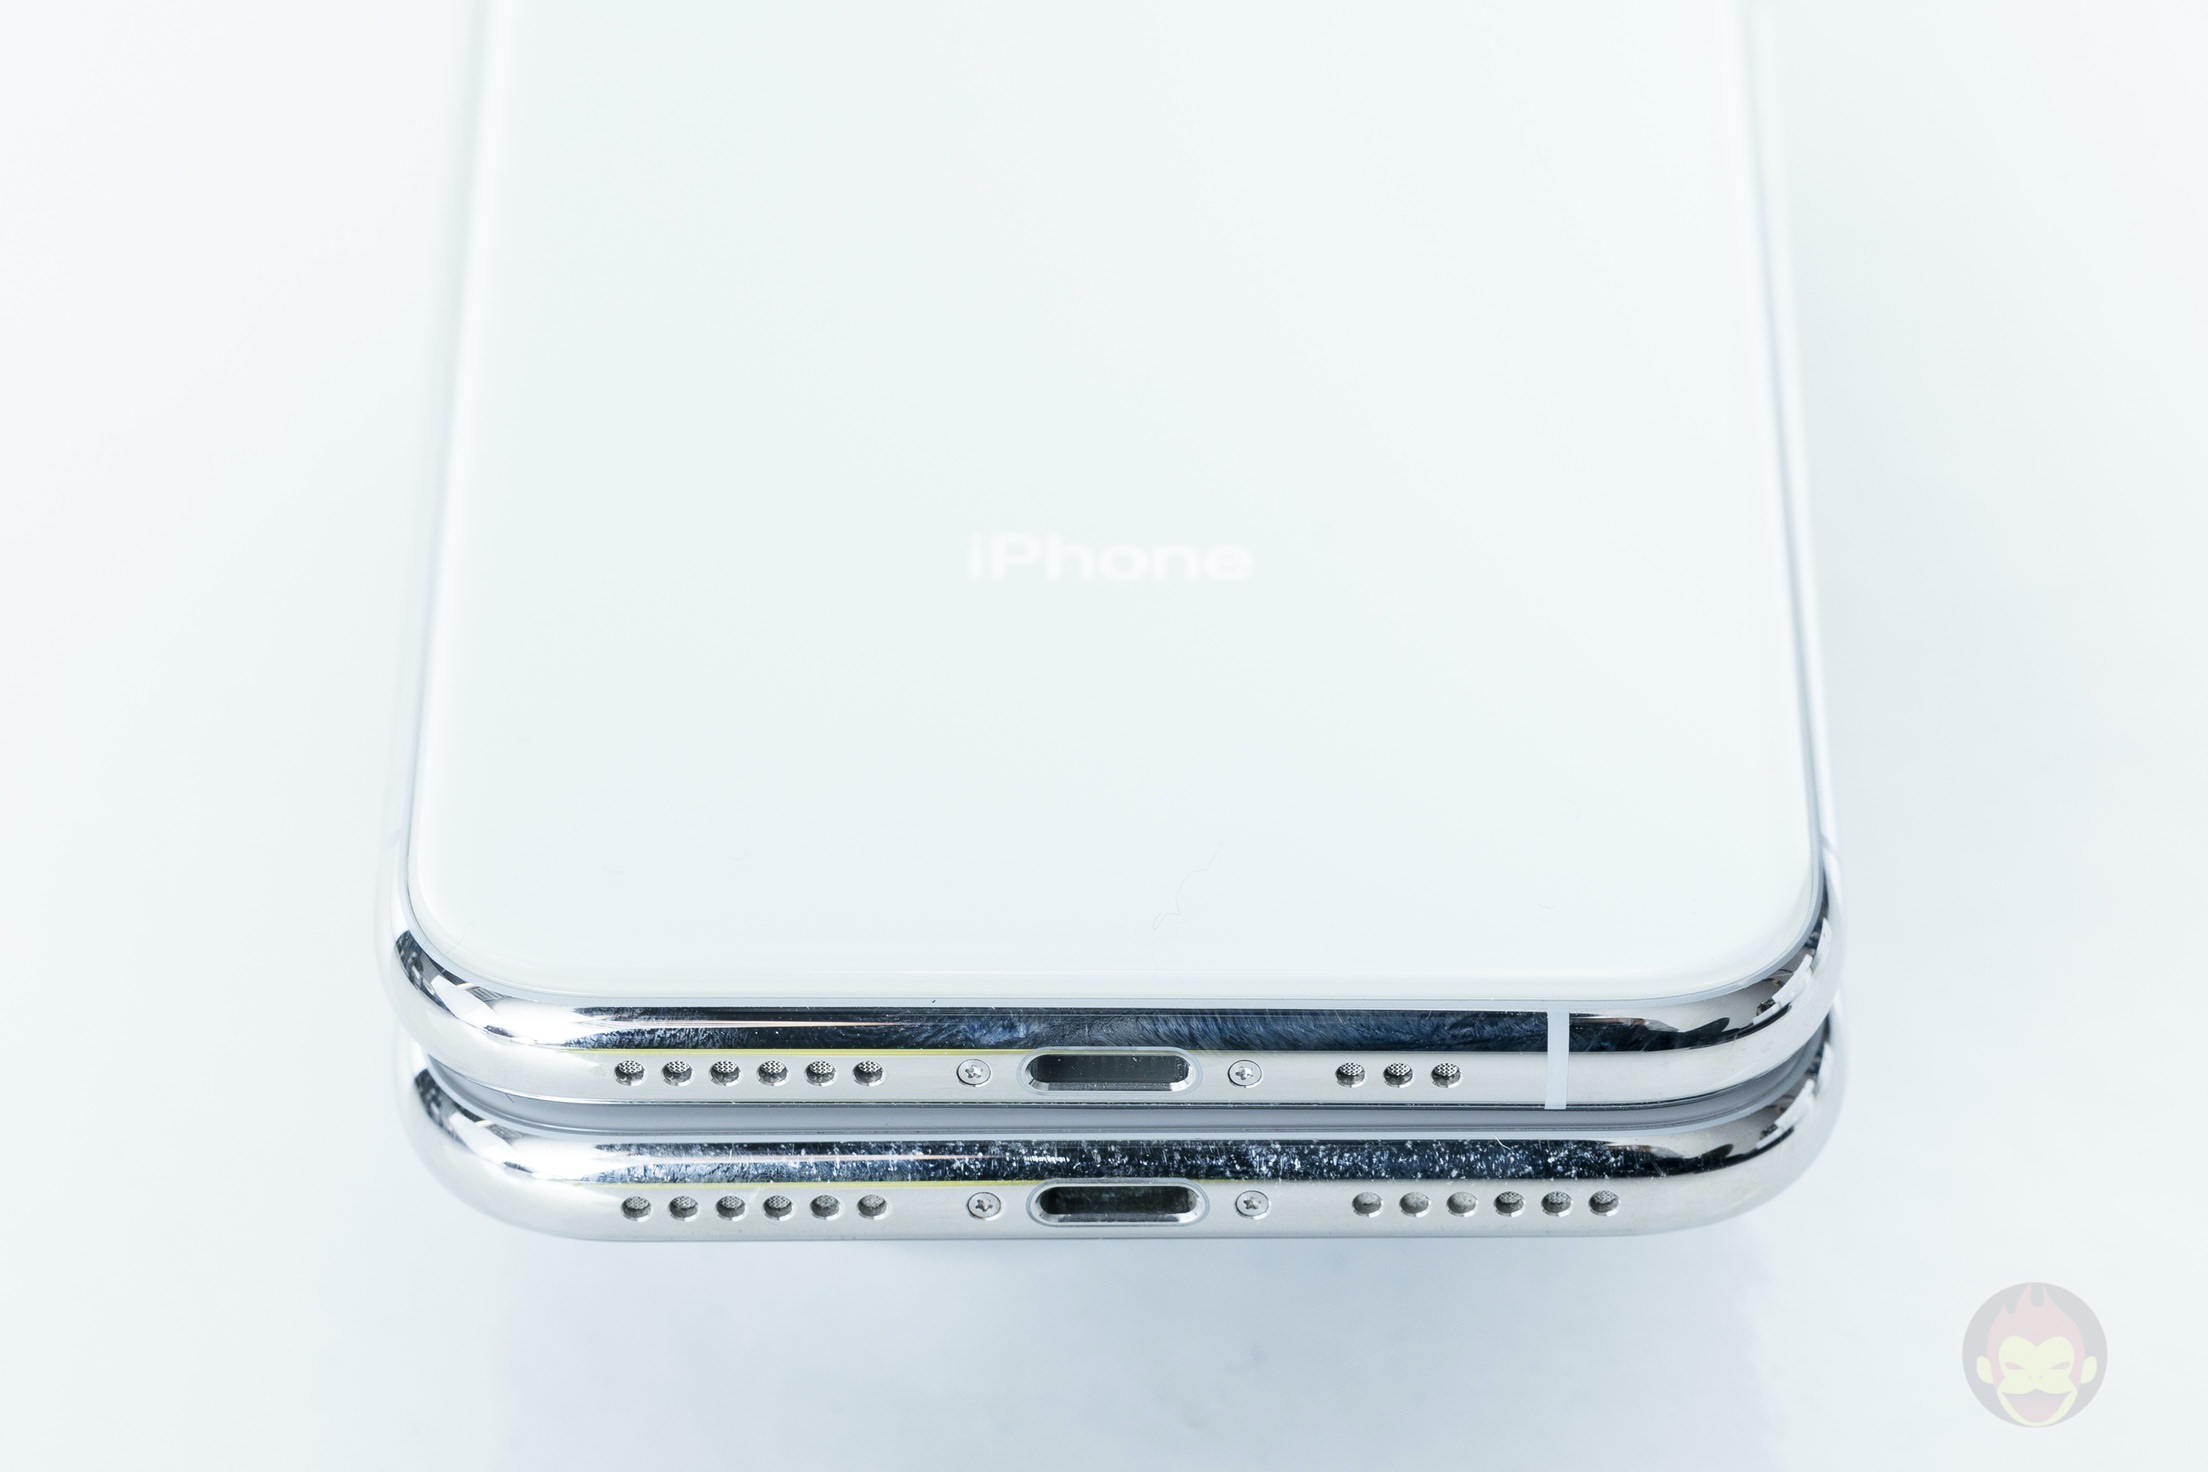 iPhone-XS-XS-Max-Review-24.jpg